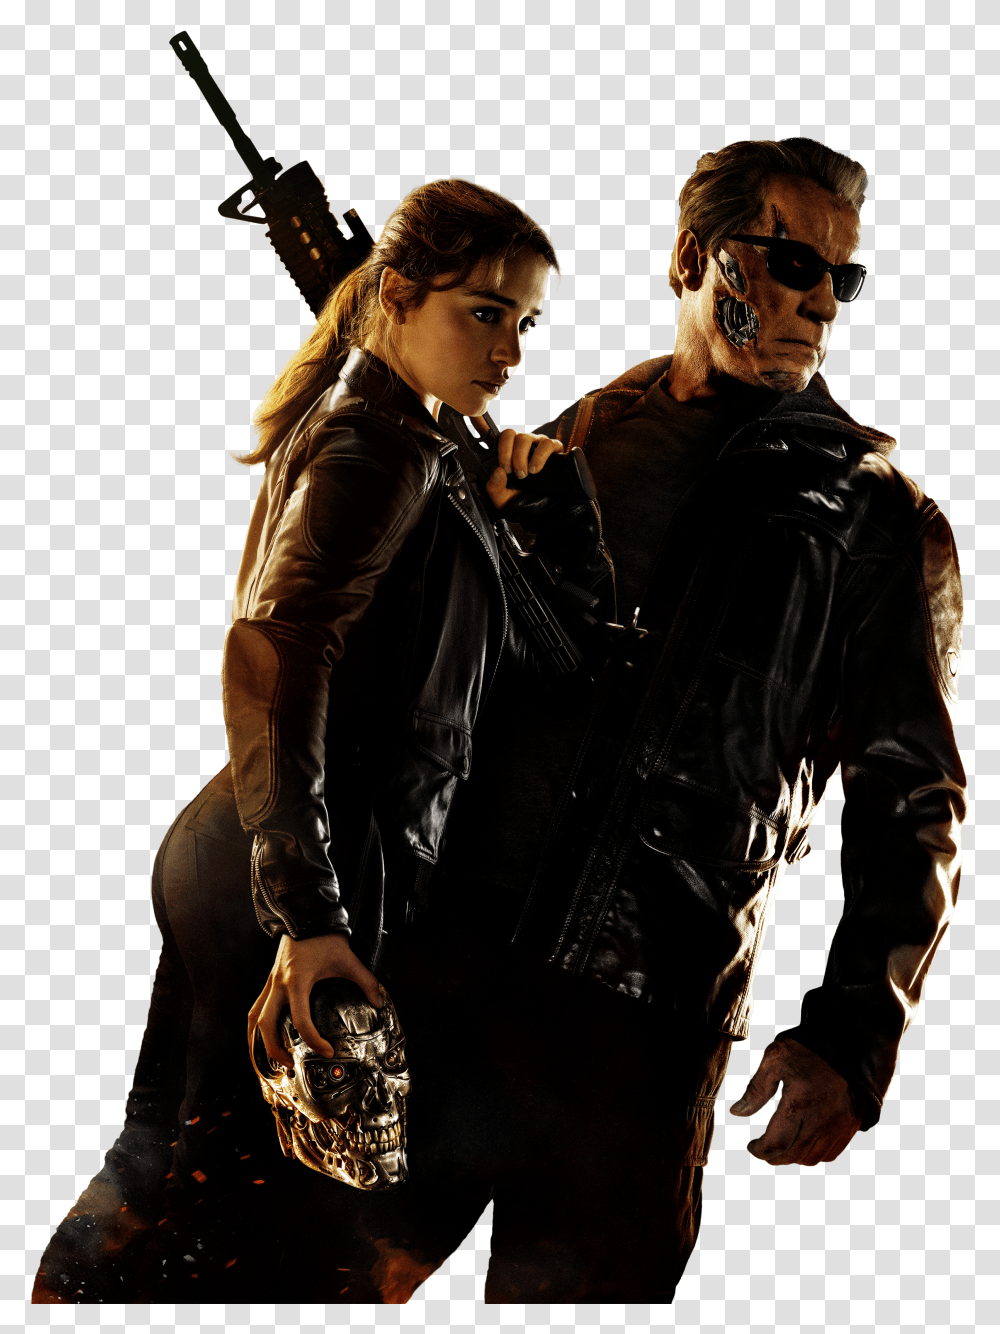 Terminator Trying To Find Some Good Promo Shots Emiliaclarke Transparent Png